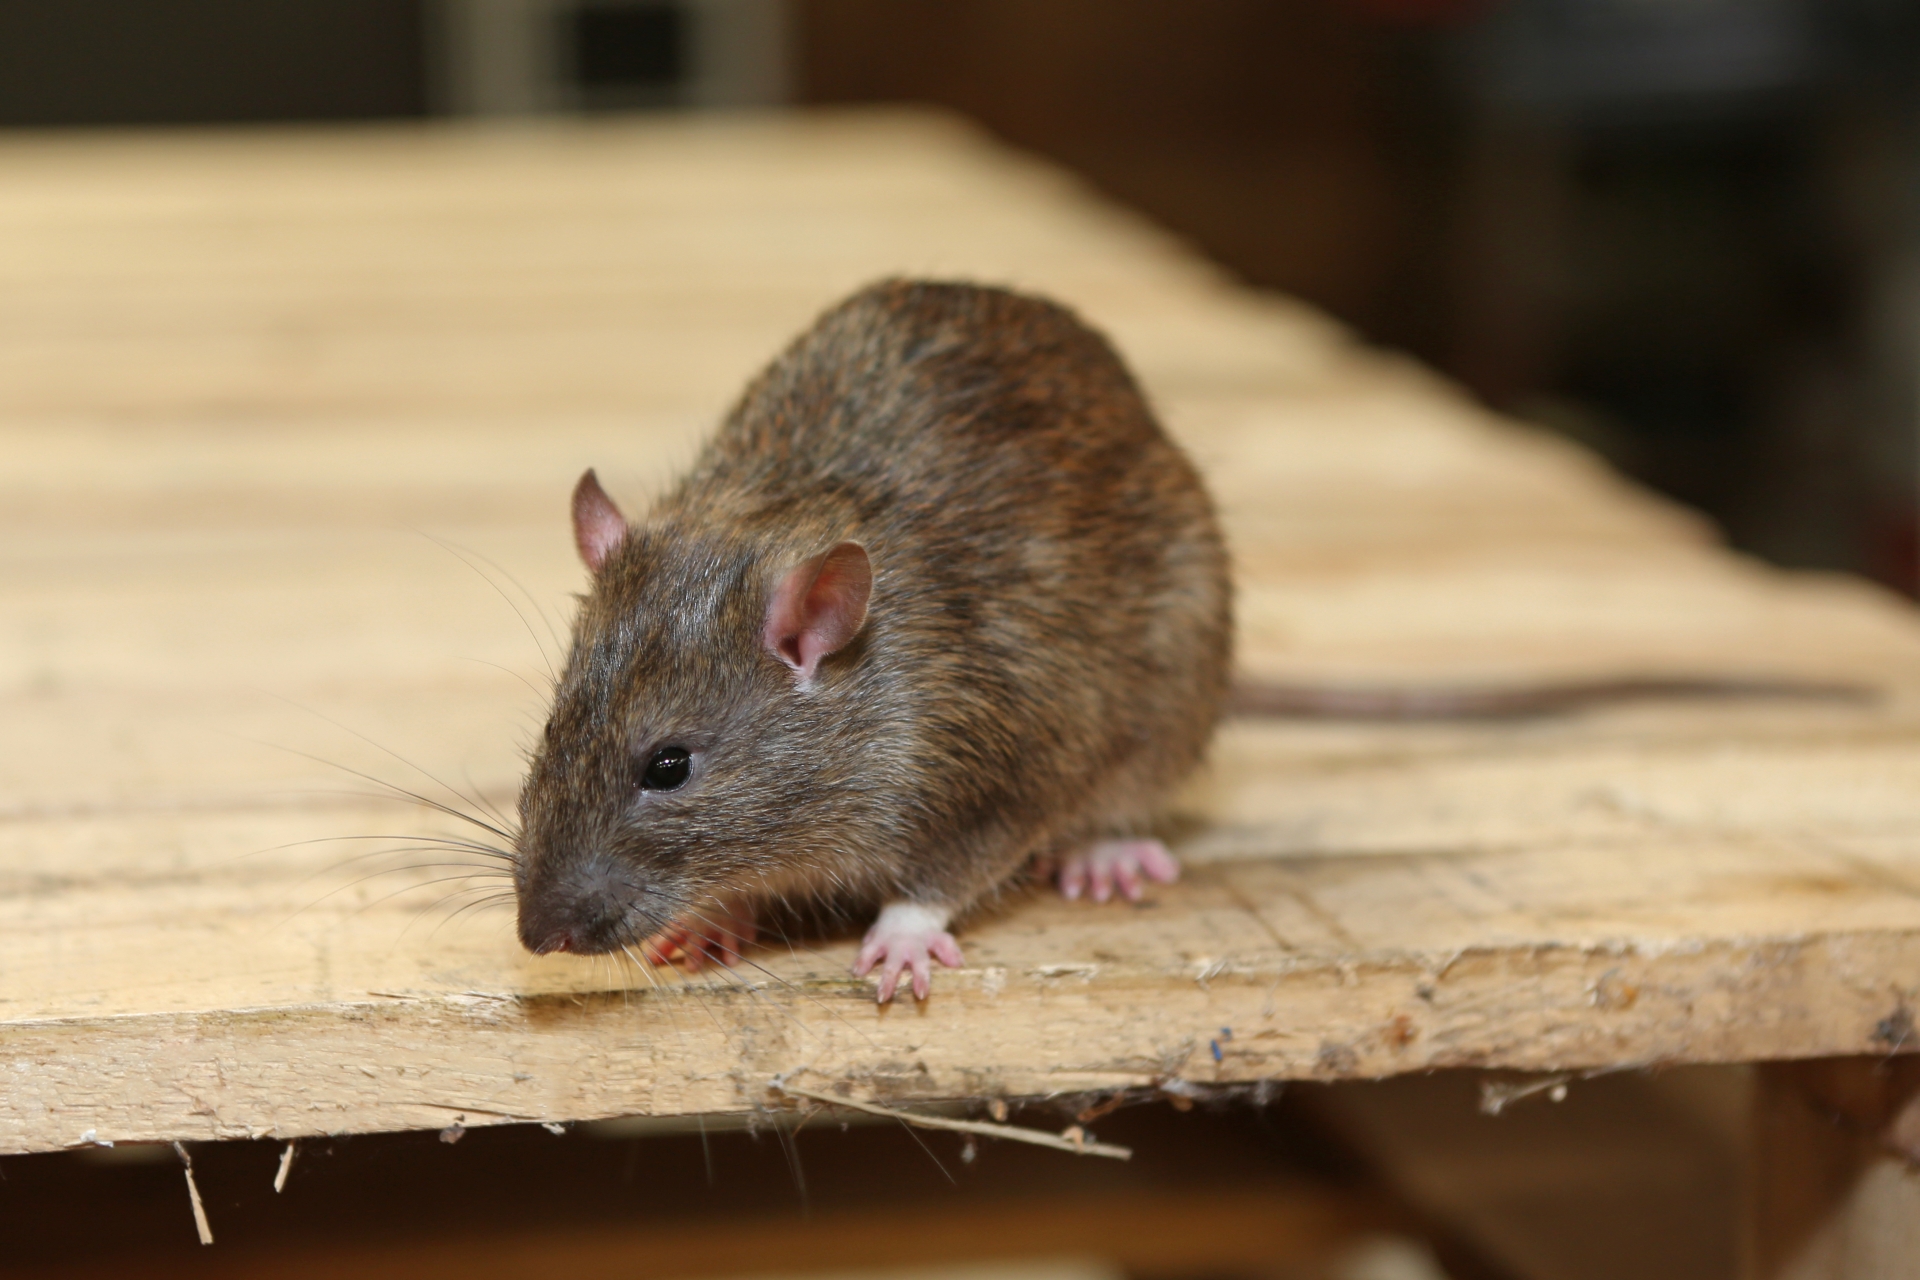 Rat Control, Pest Control in Chigwell Row, Chigwell, IG7. Call Now 020 8166 9746